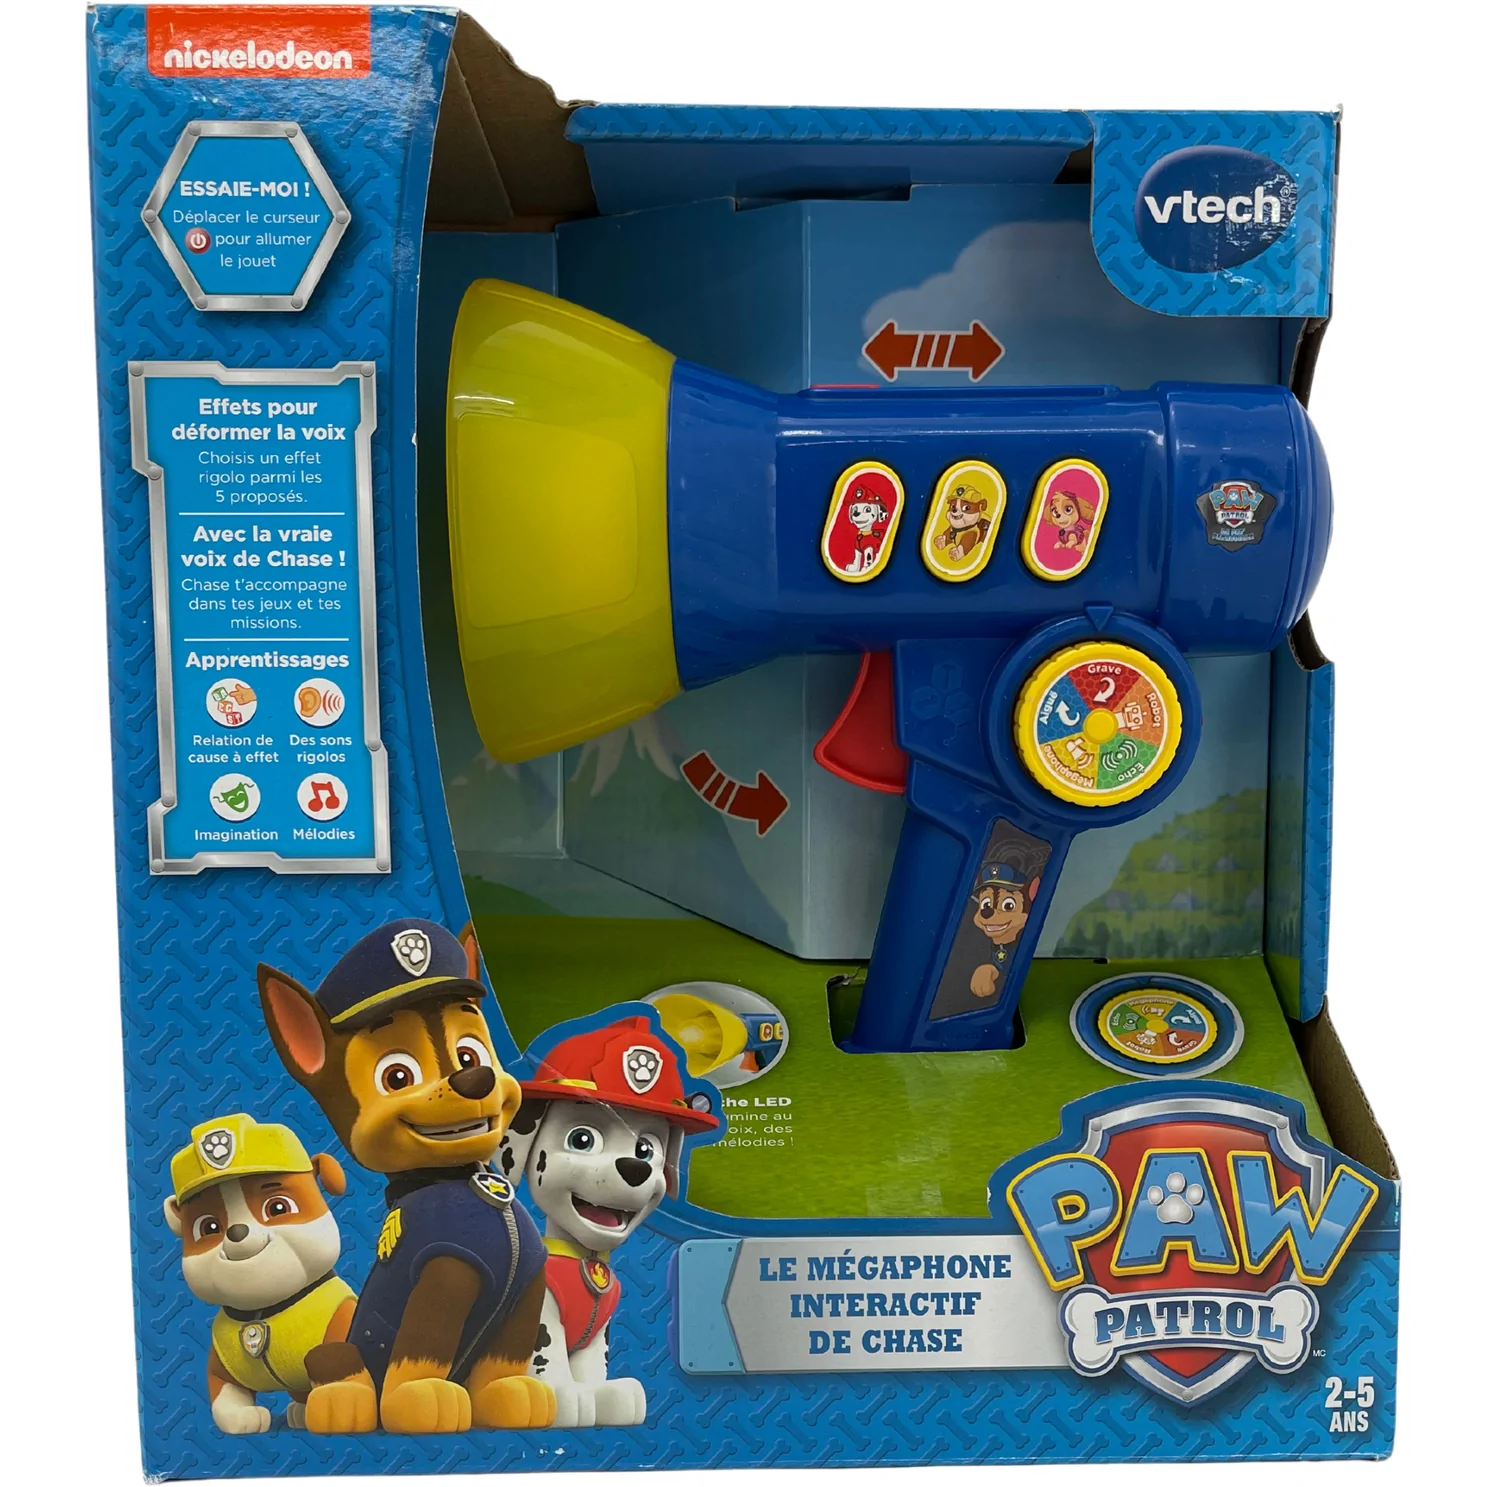 Vtech Paw Patrol Megaphone Toy / French Version / Interactive Toy / Light & Sound / Voice Changer